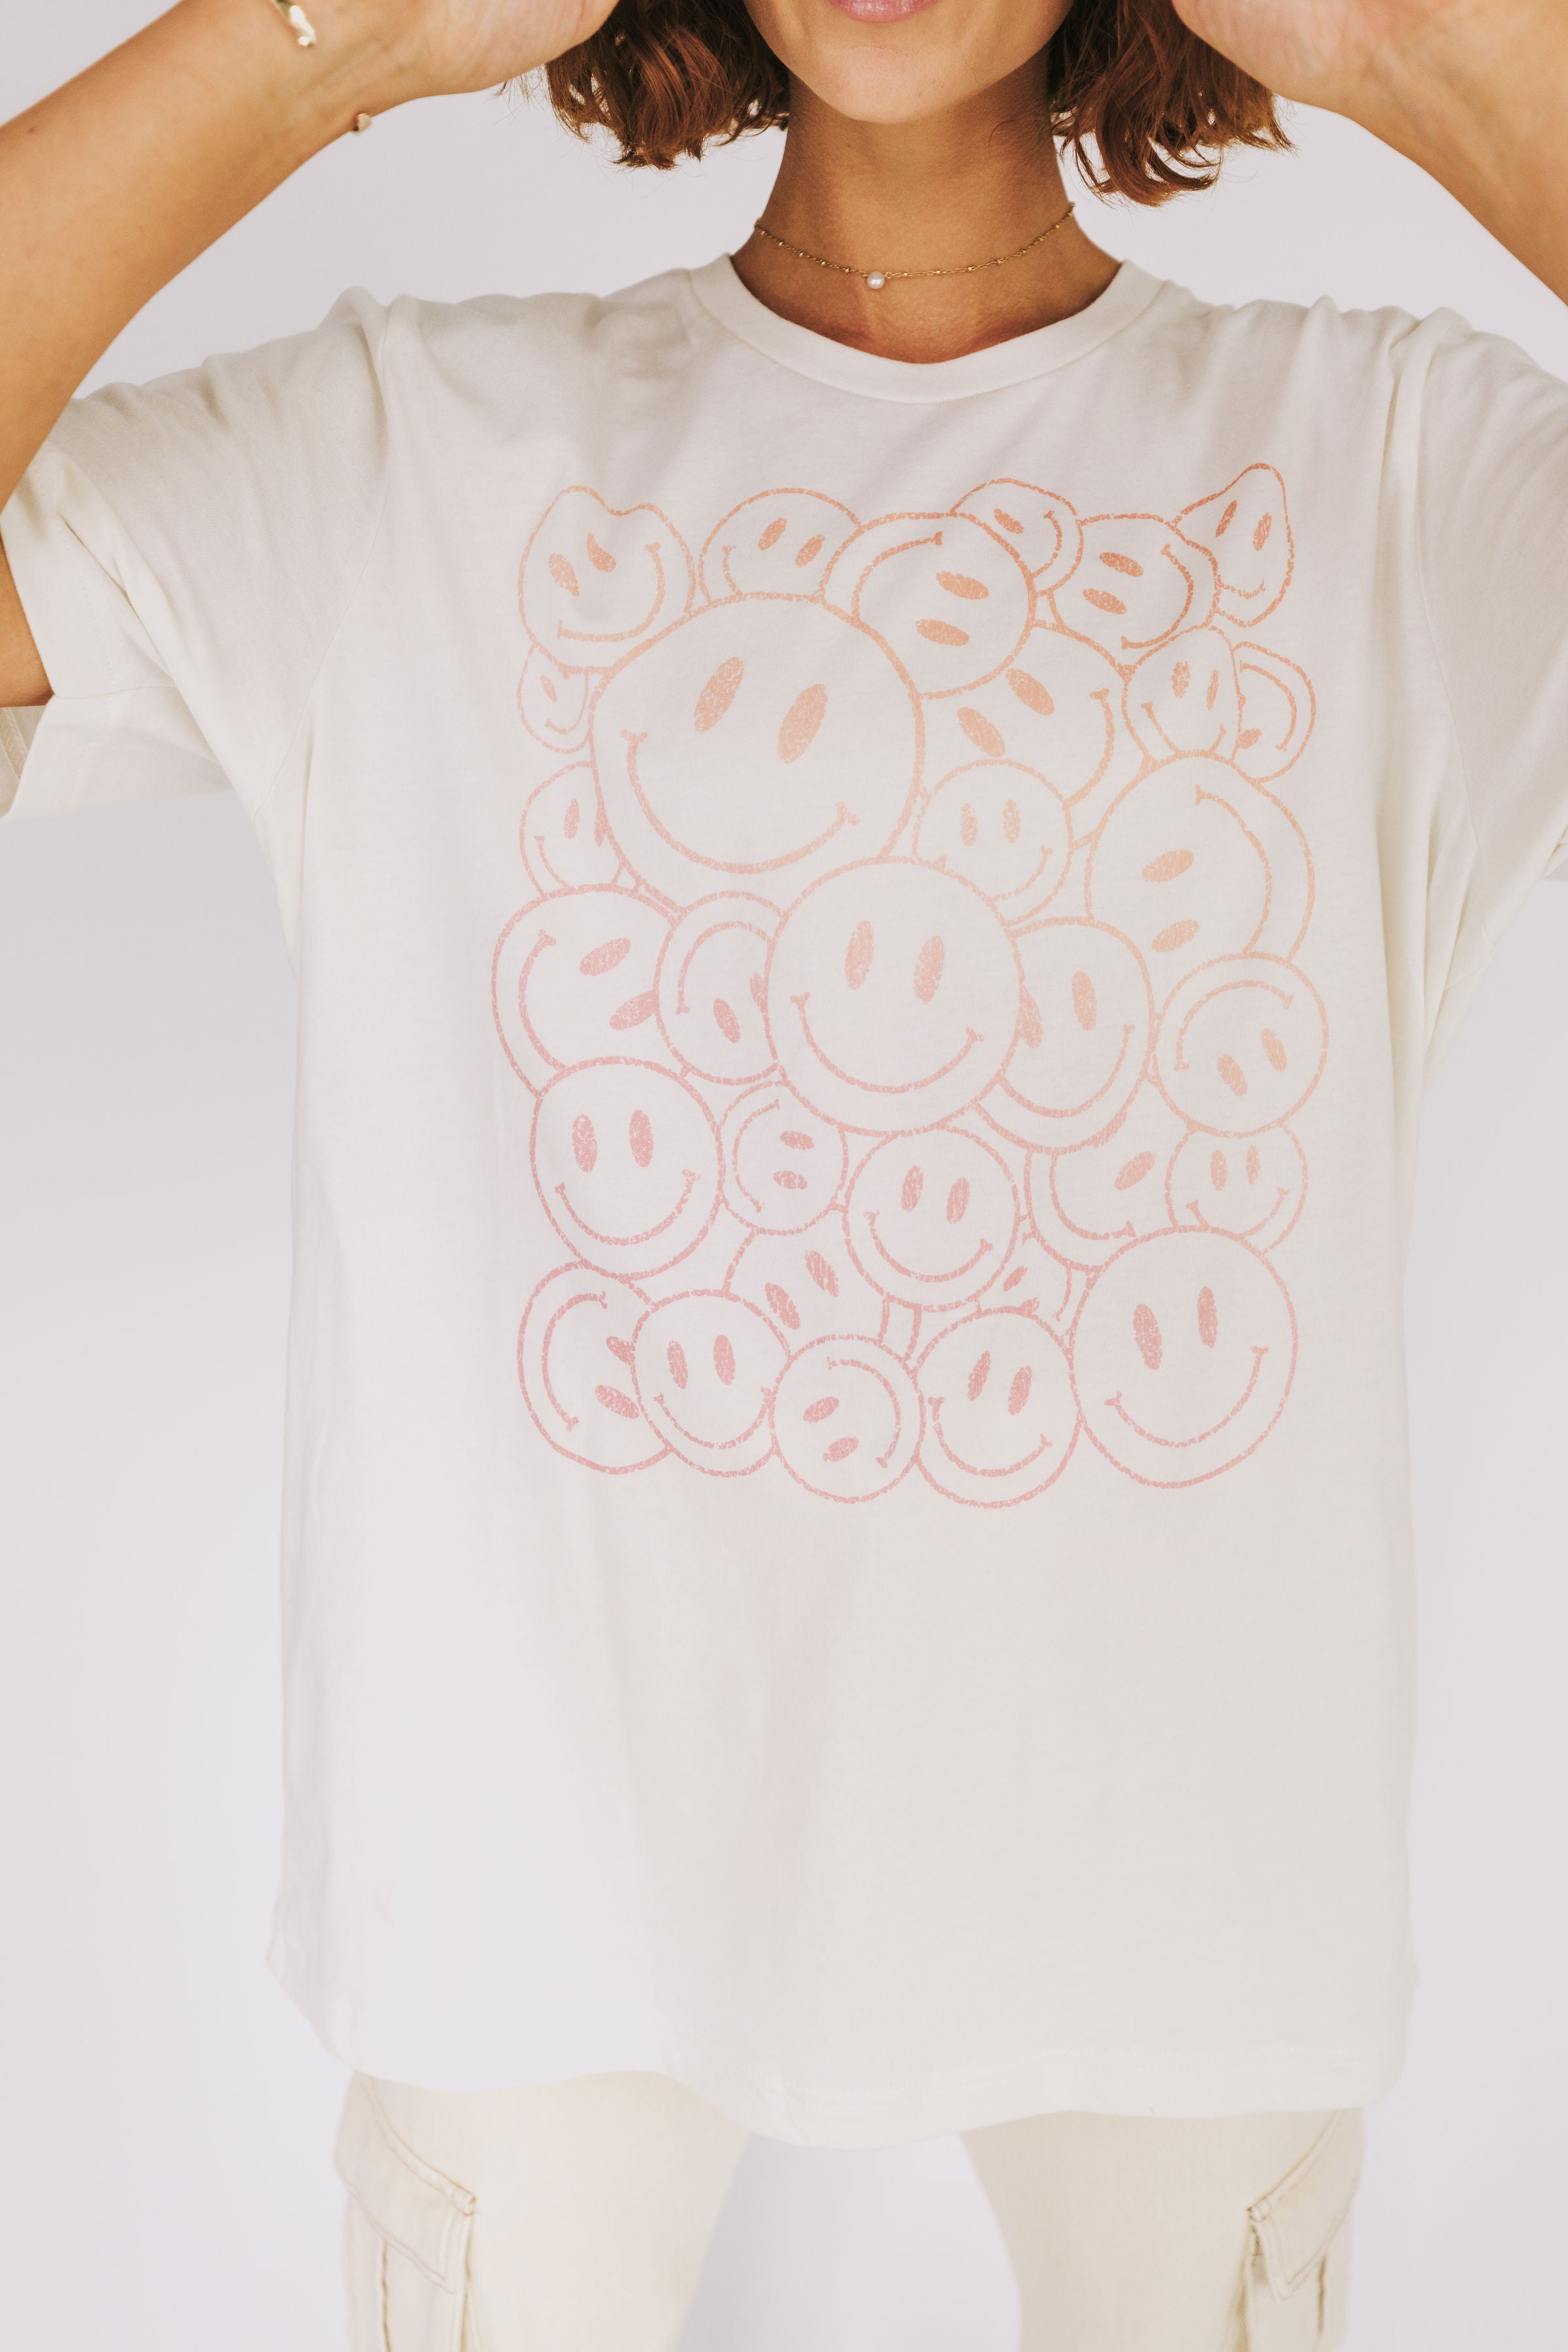 Smile About It Tee